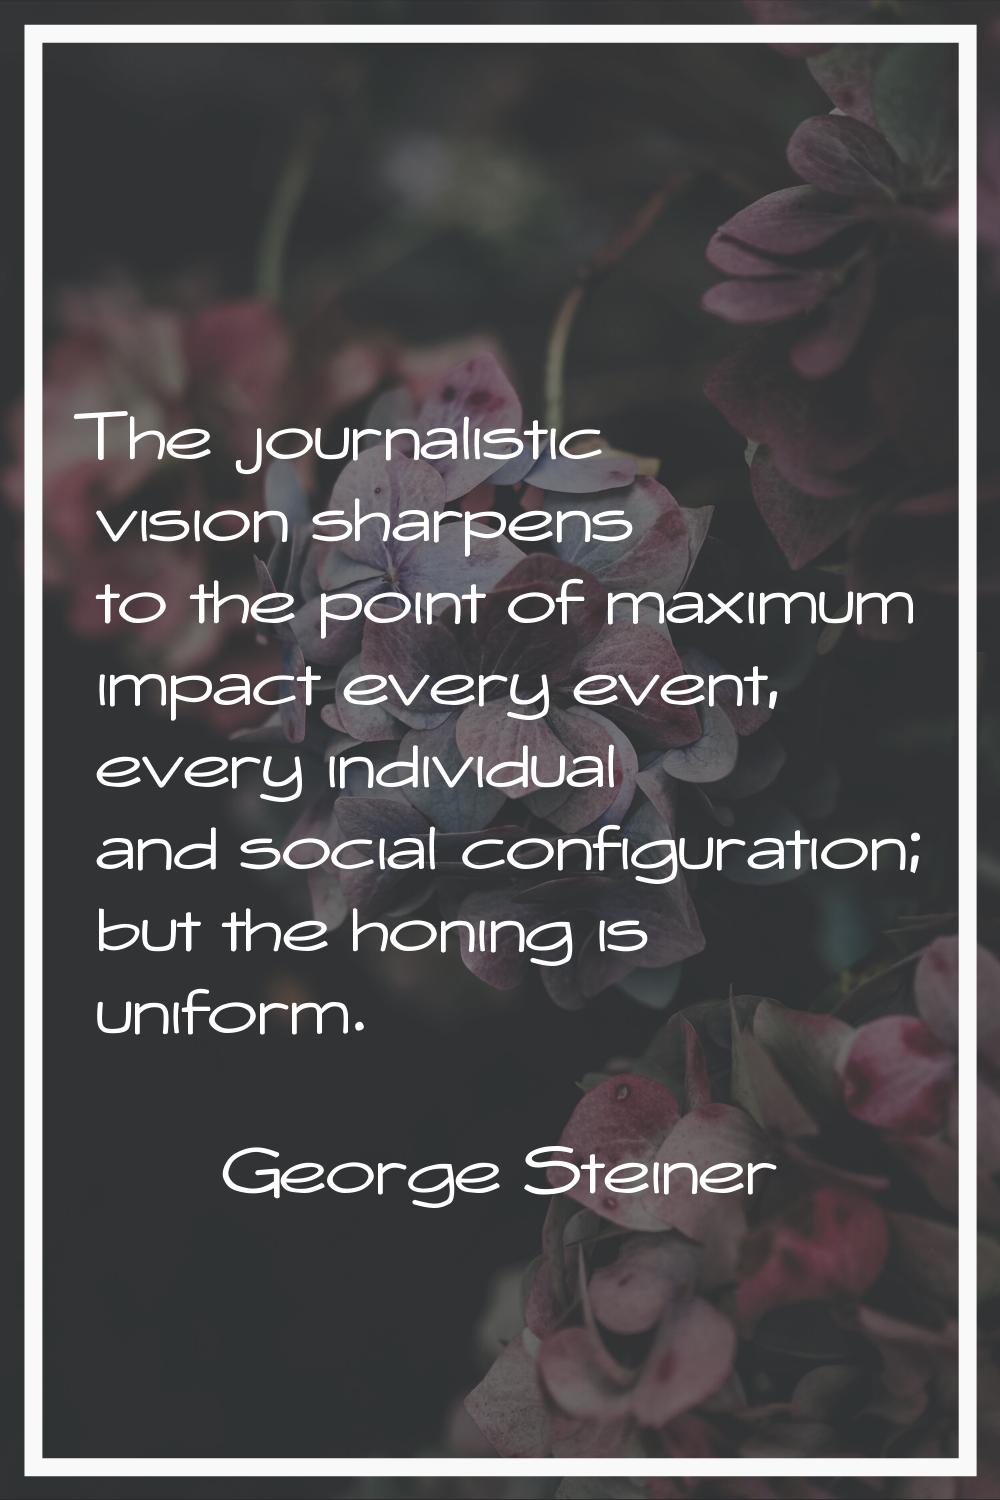 The journalistic vision sharpens to the point of maximum impact every event, every individual and s